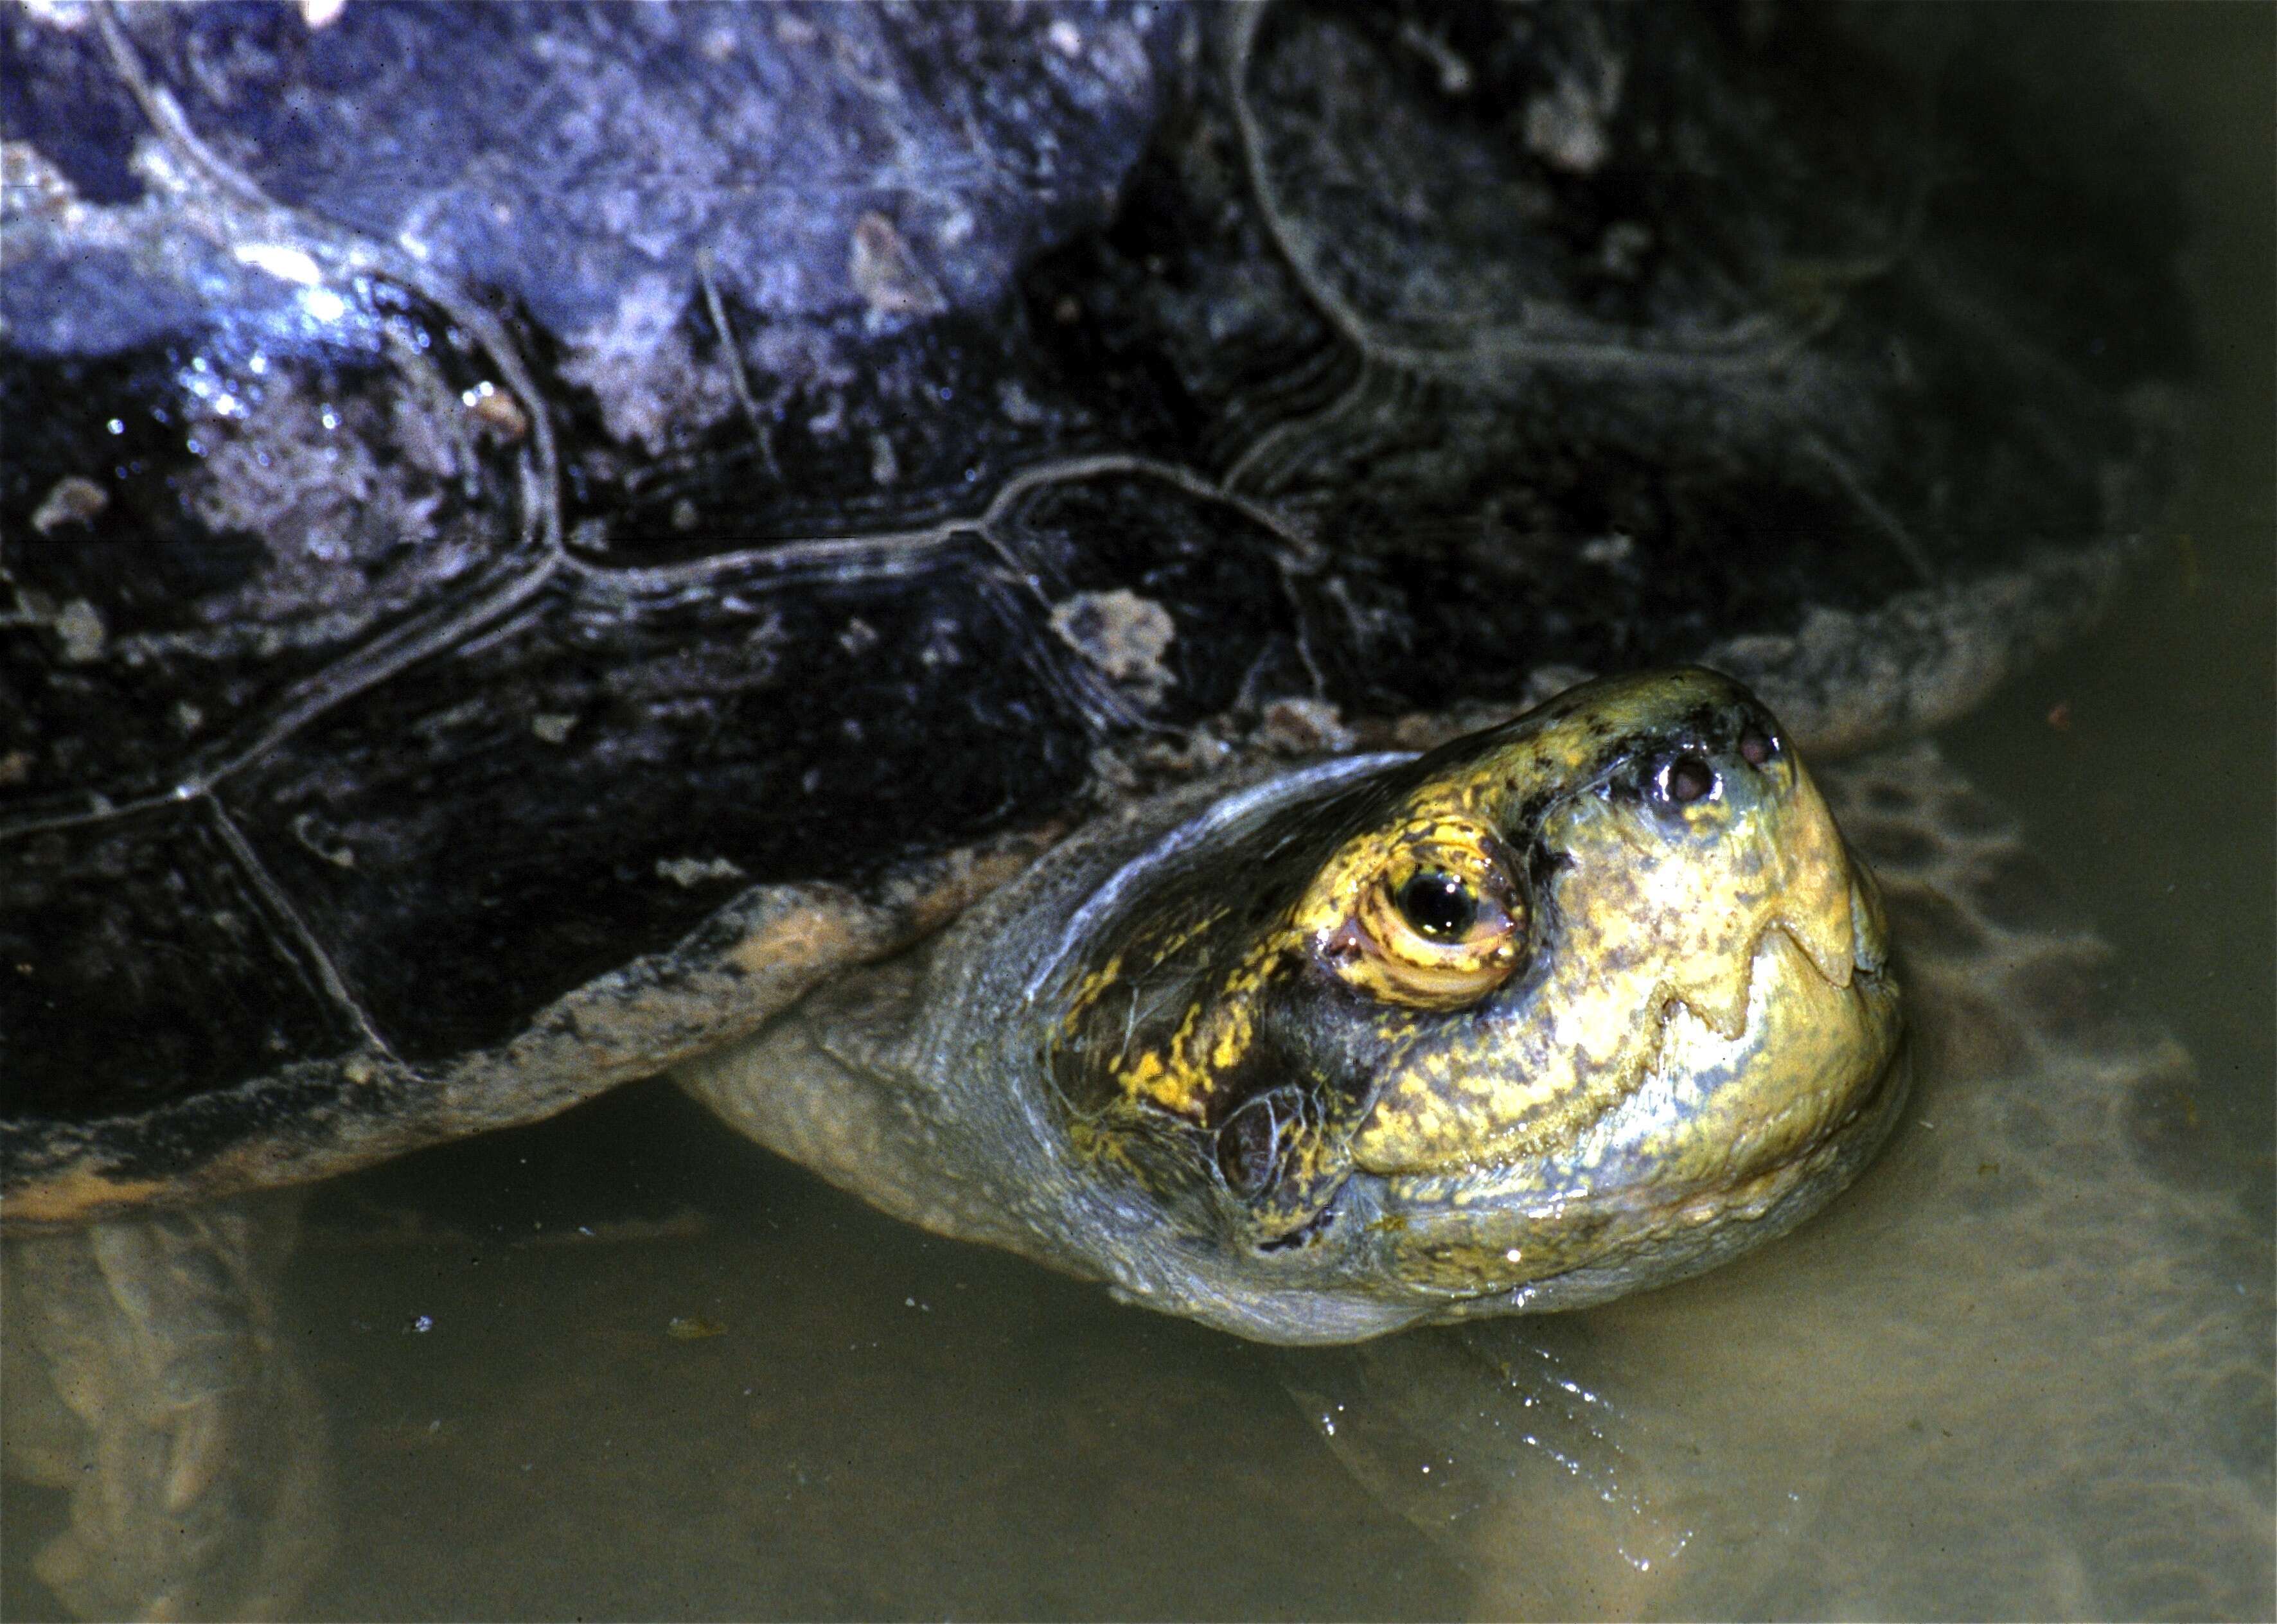 Image of Forest turtles